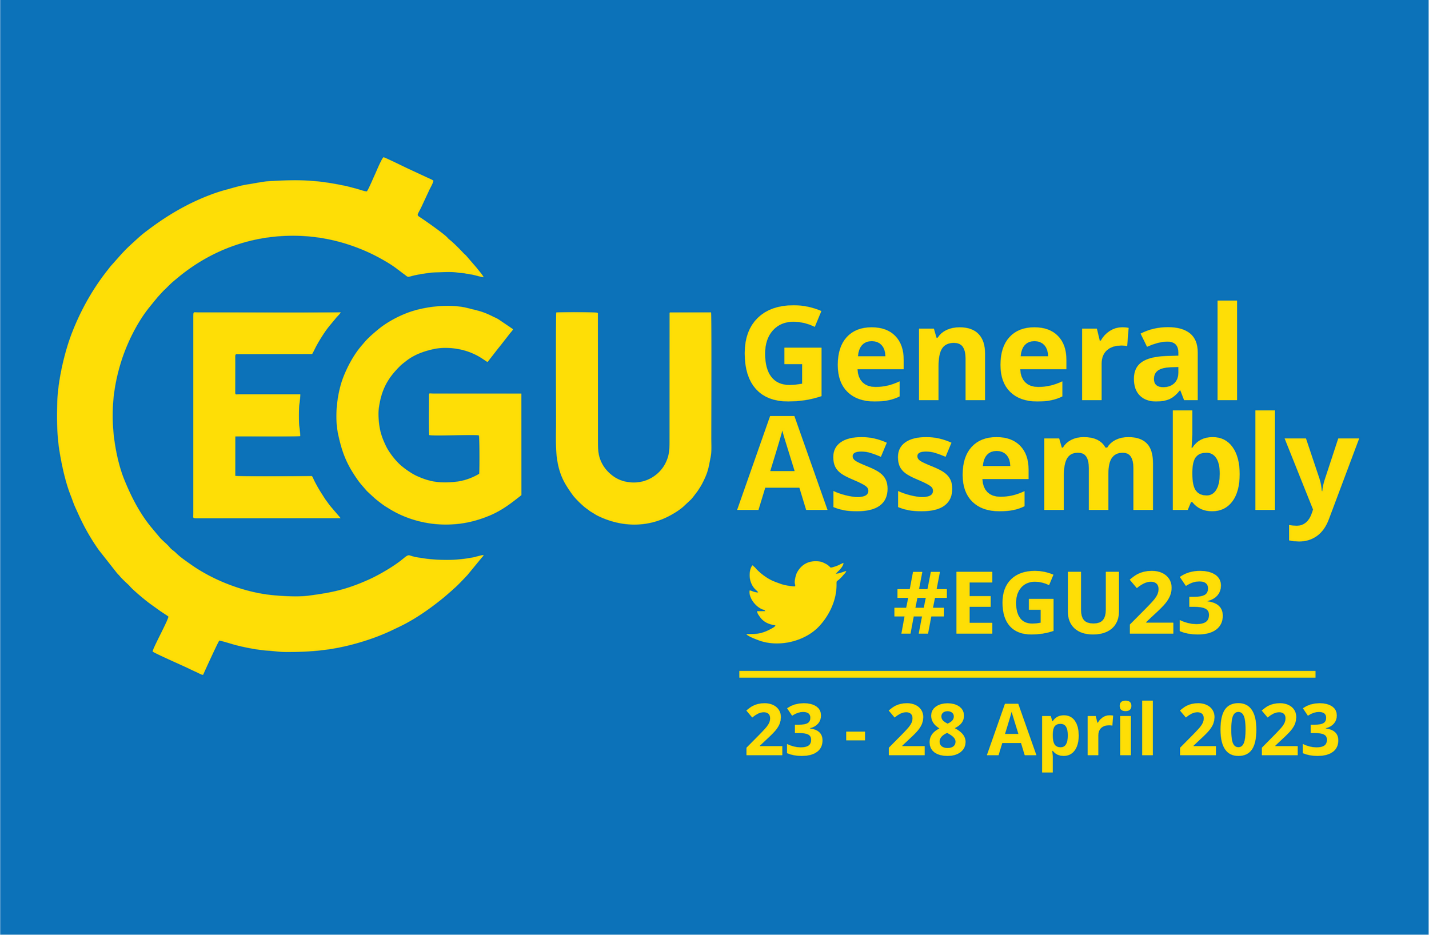 The EGU General Assembly 2023